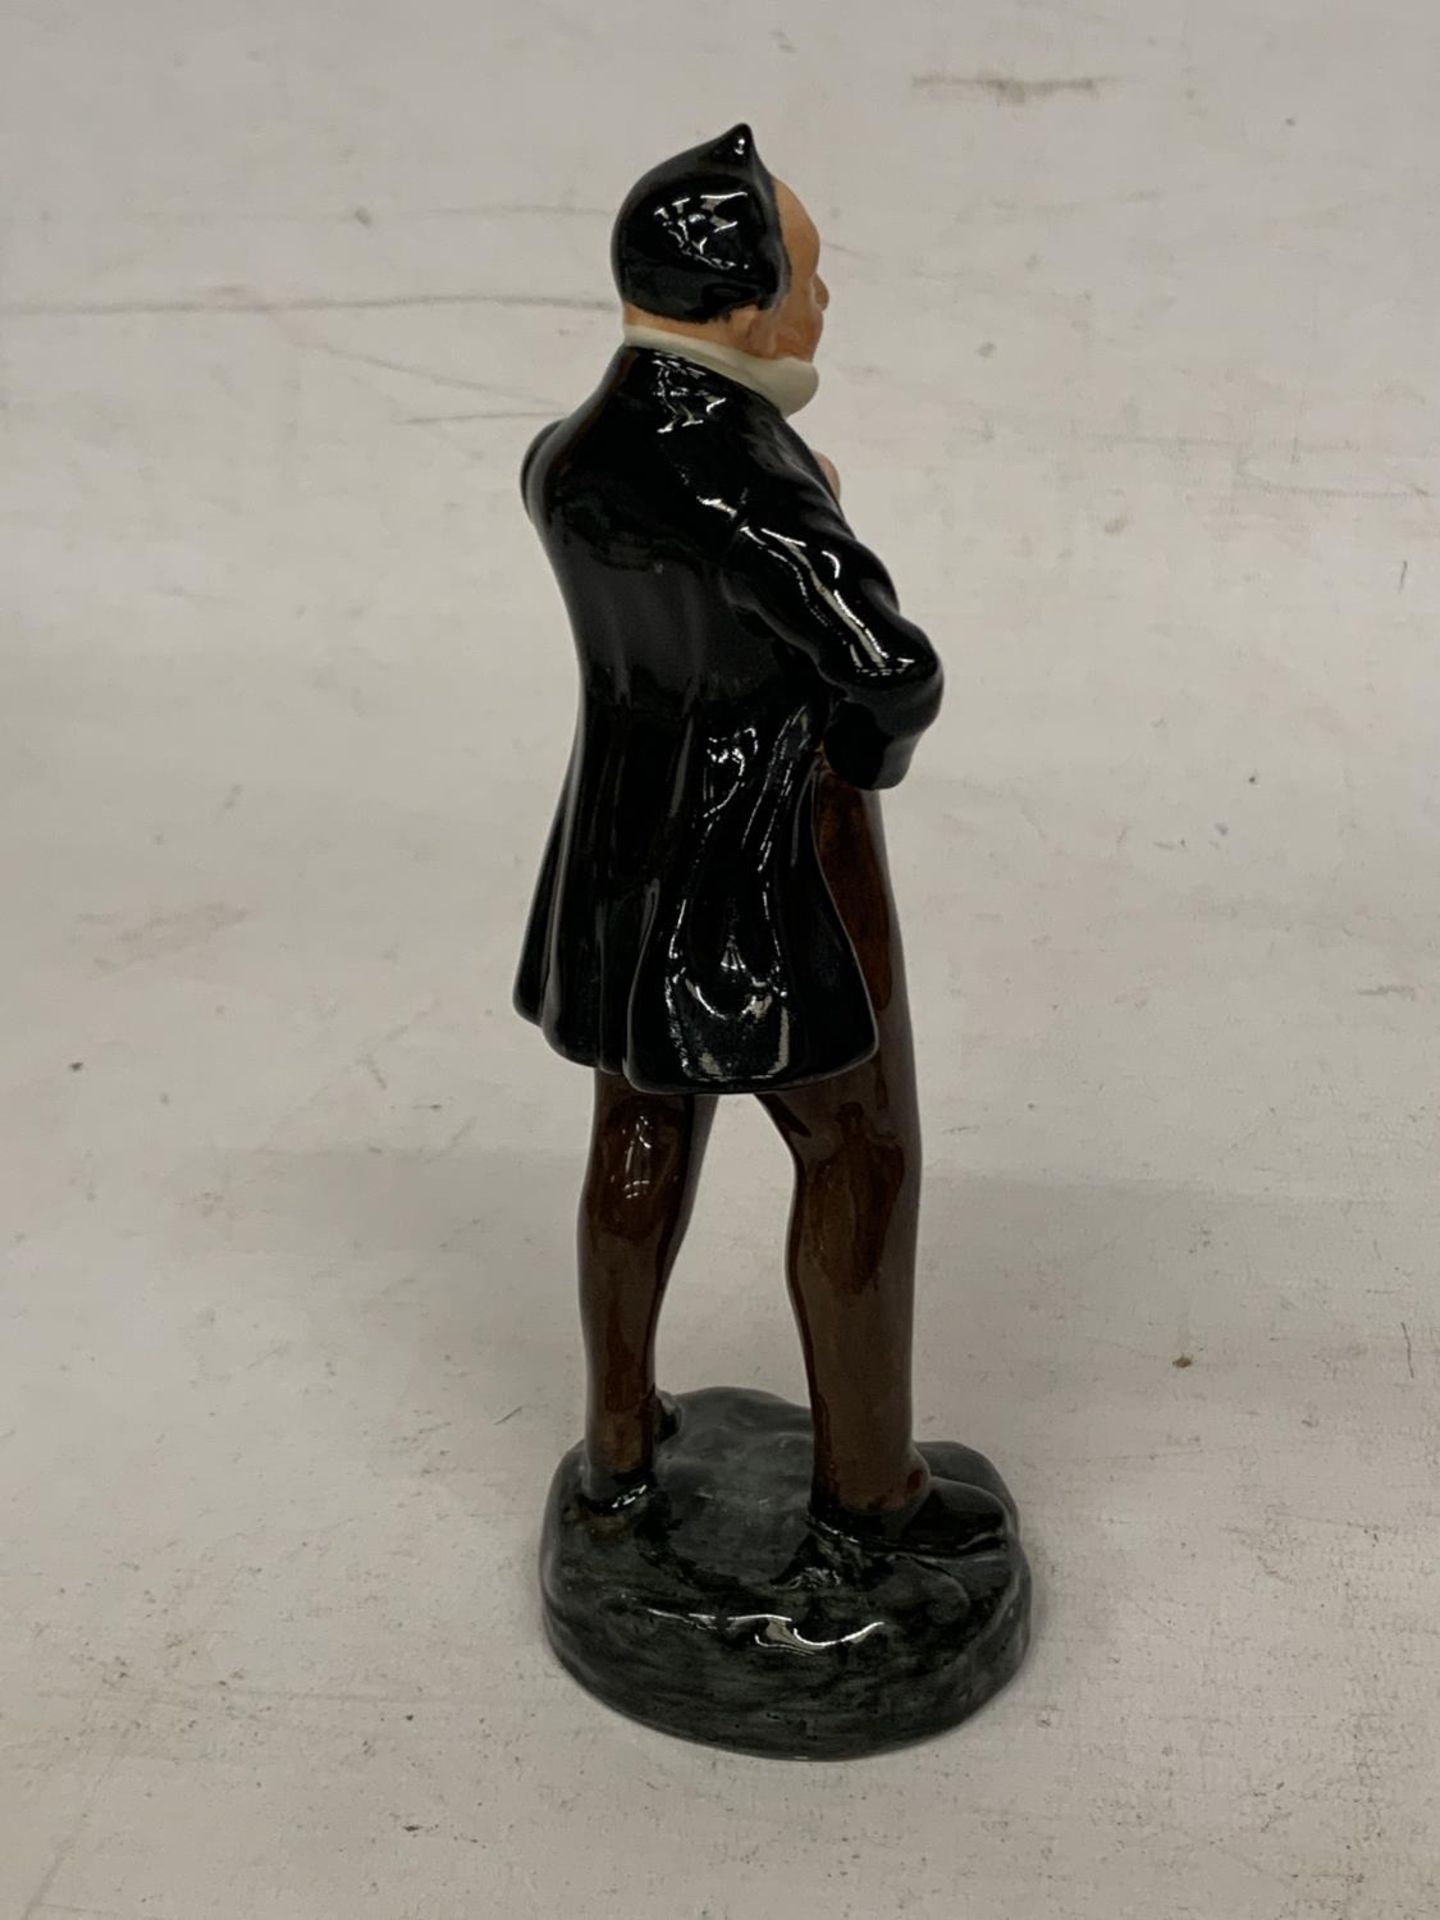 A ROYAL DOULTON 'PECKSNIFF' FIGURINE (HN 2098) - Image 2 of 4